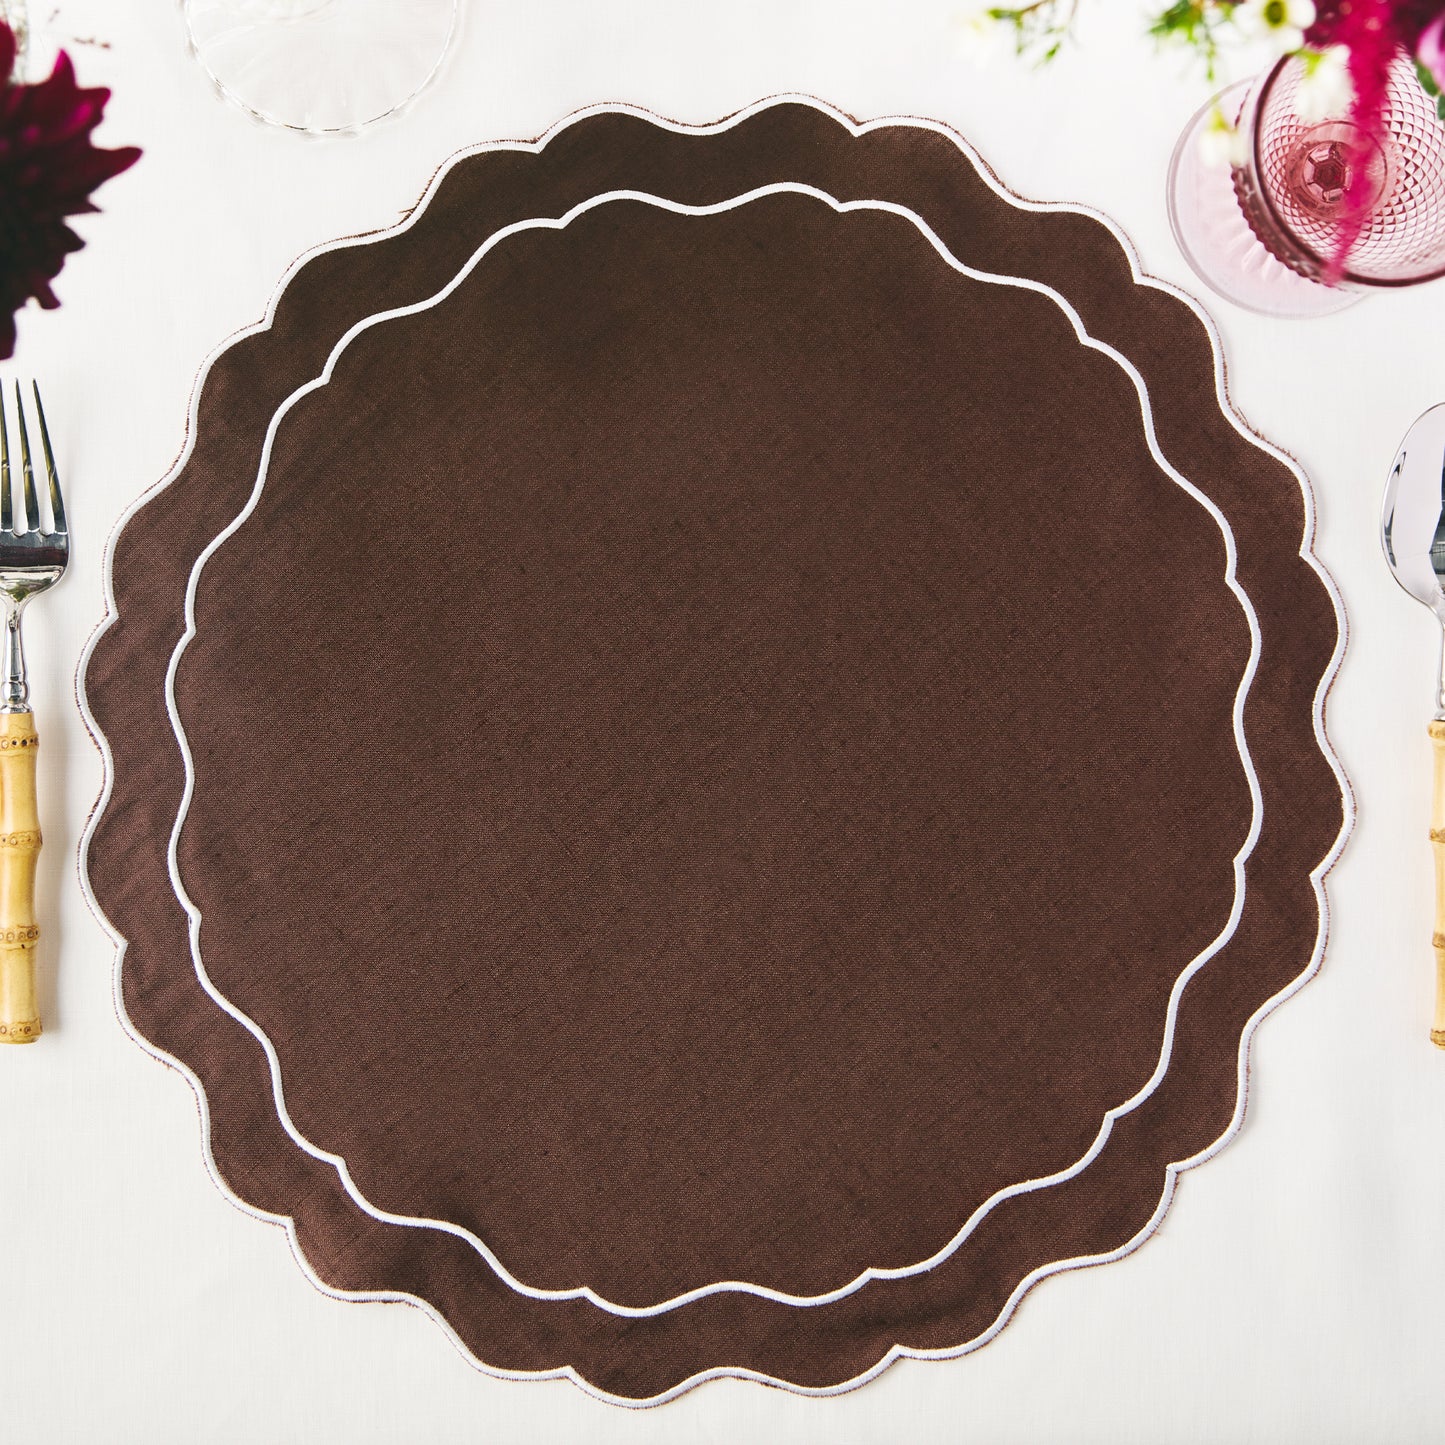 Set of 4 - Linen Scalloped Edged Placemats - Chocolate